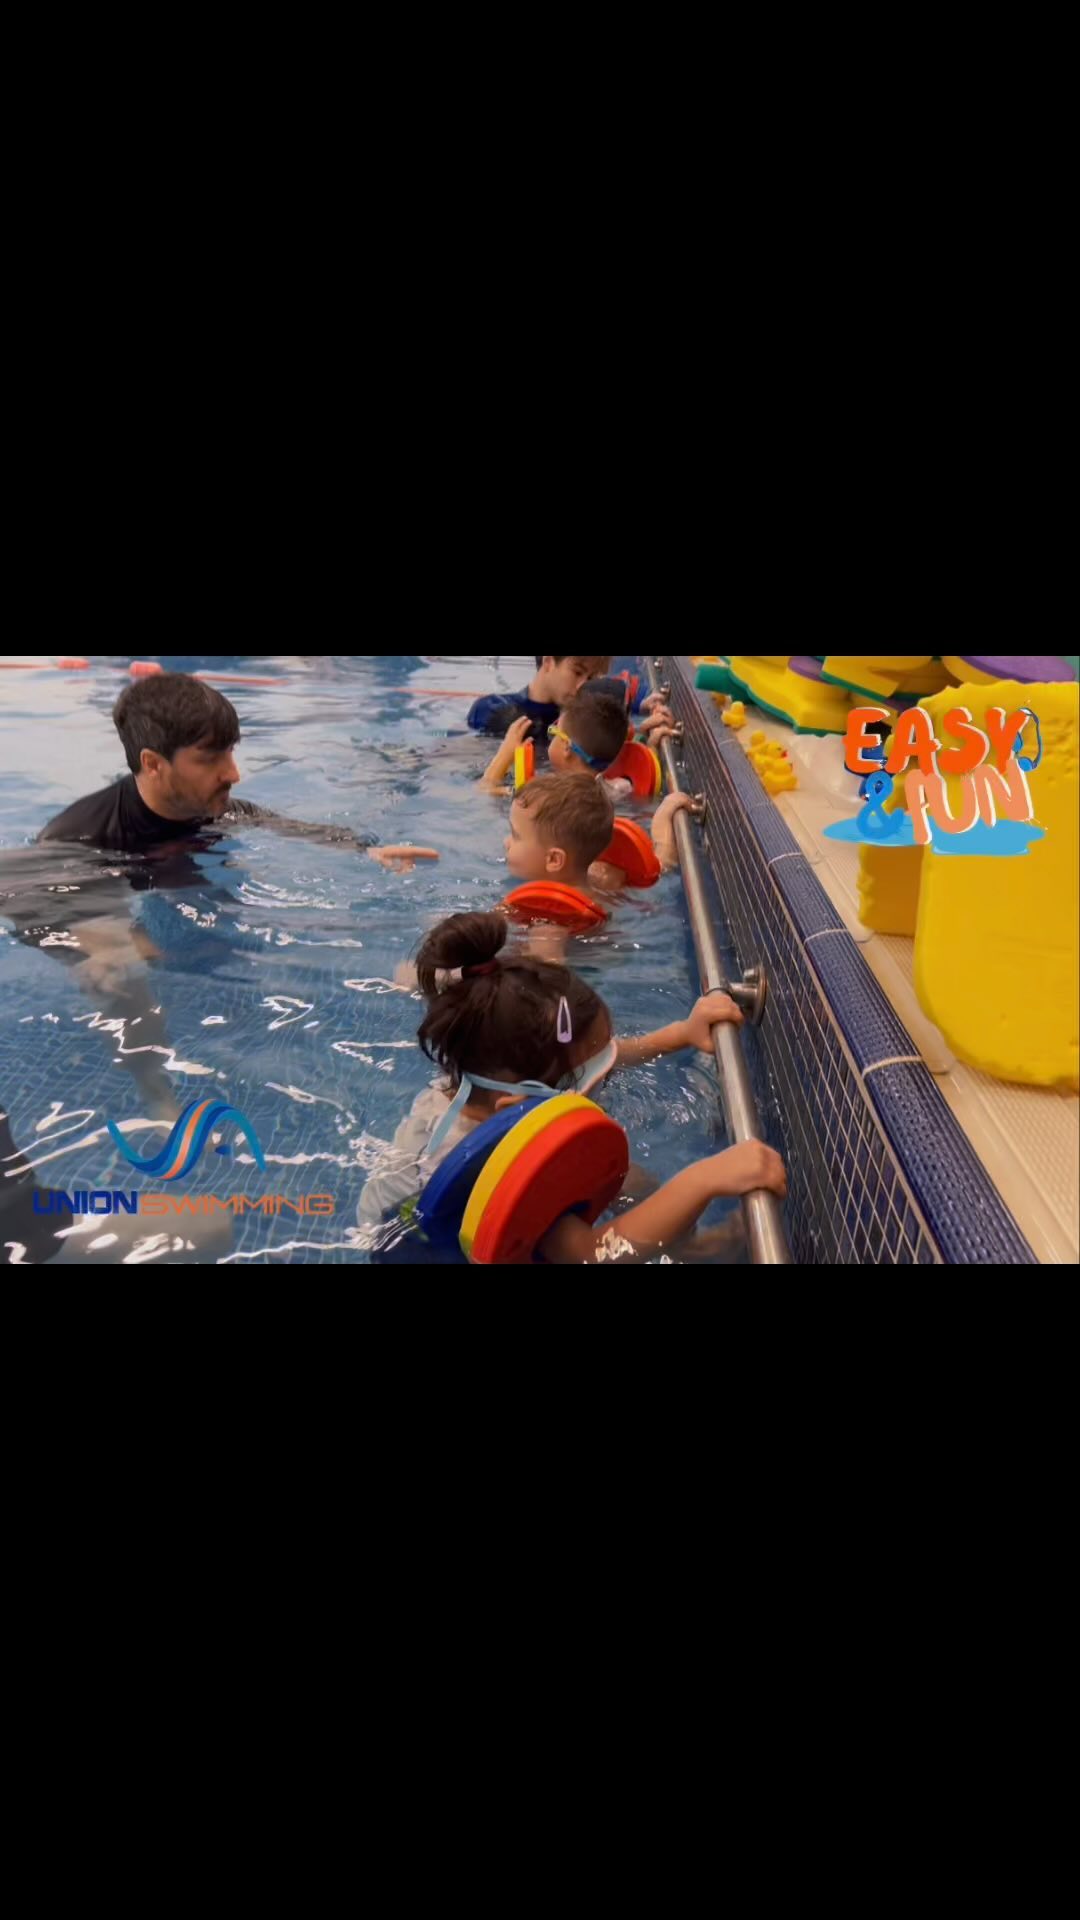 Get ready to make a splash! 🌊🏊‍♂️🏊‍♀️
Places available Sunday mornings🌈
At Wilnecote school
Your child’s swimming lessons are about to begin, and it’s going to be fin-tastic! Our expert instructors are here to help your little fishy learn all the swim skills they need to make a big splash in the pool.

During their lessons, your child will learn how to float, paddle, and kick their way through the water like a pro. They’ll also learn important water safety tips, so they can stay safe while having fun in the pool.

But learning to swim isn’t all serious business - we know how to have fun too! Your child will love our silly games, fun toys, and awesome pool noodles. We’ll have them laughing and splashing around in no time.

So grab your swimsuit, towel, and get ready for some swimming fun! We can’t wait to see your child become a confident and skilled swimmer. Let’s dive in together! 🐠🏊‍♂️🏊‍♀️

Contac us
info@unionswimming.com
#swimminglessons #swimming🏊